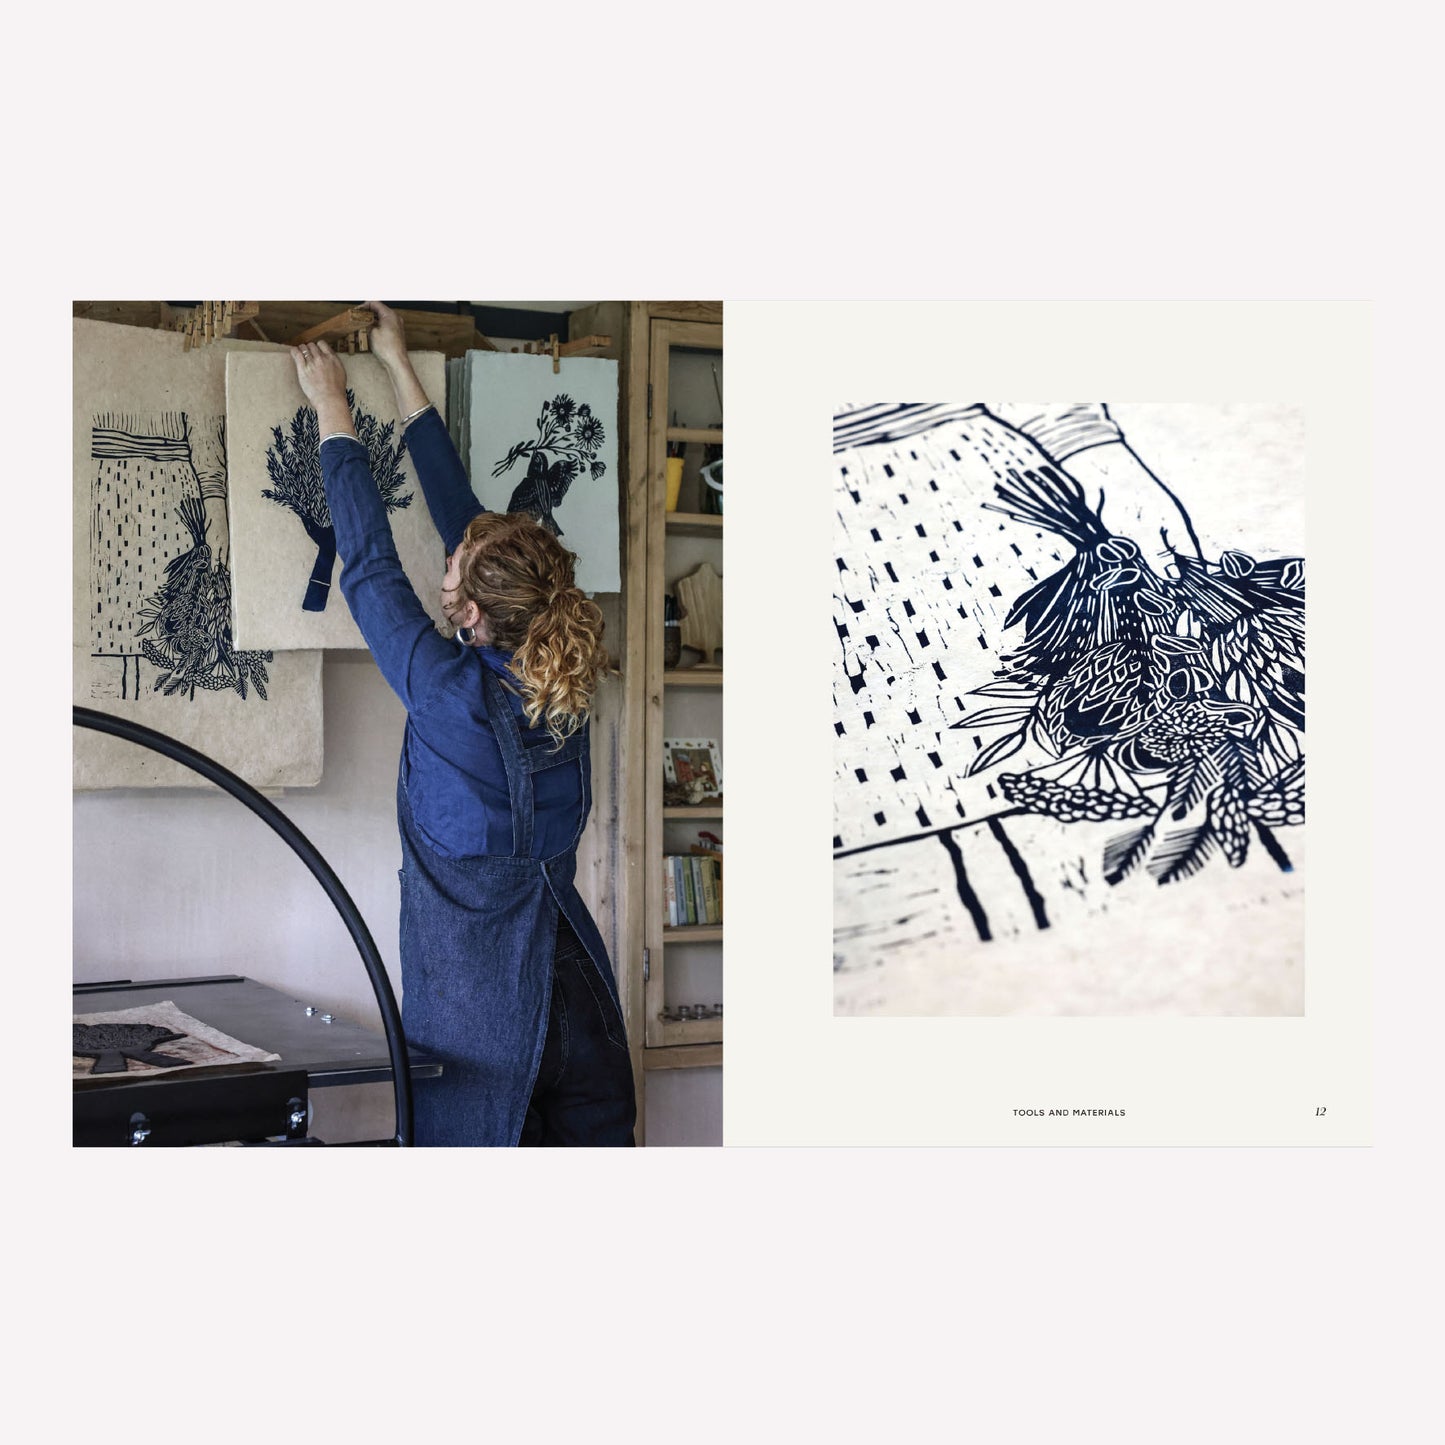 Internal book spread in ‘Botanical Block Printing’ showing artist Rosanna Martin in her print studio, alongside a beautifully photographed example of her botanical Lino prints.